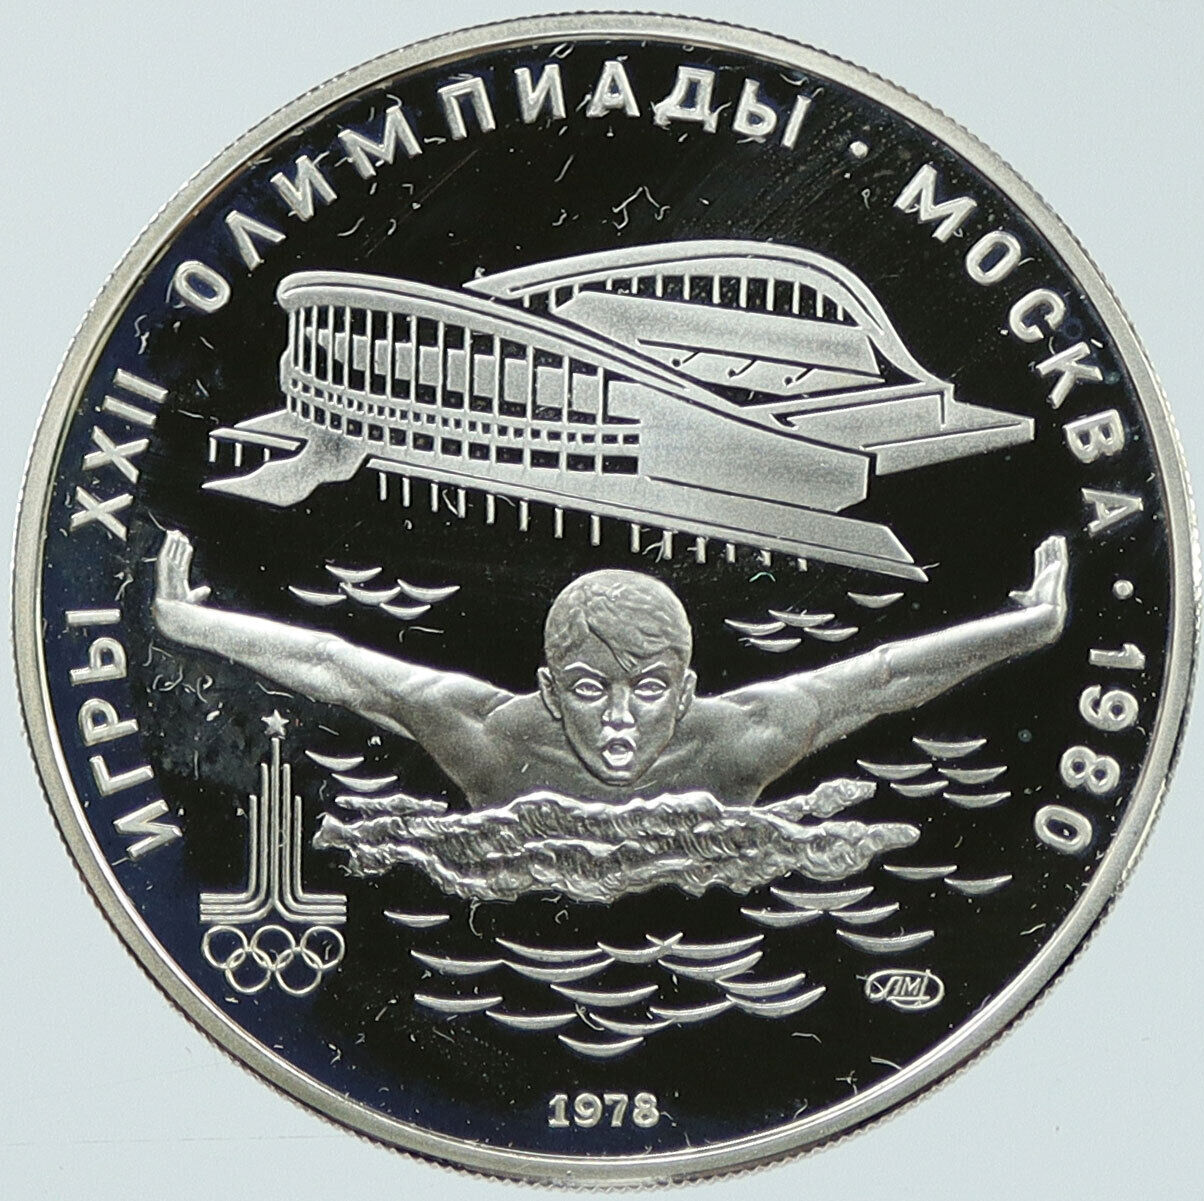 1978 RUSSIA 1980 MOSCOW SUMMER OLYMPICS Swimmer PROOF Silver 5 Rub Coin i116744